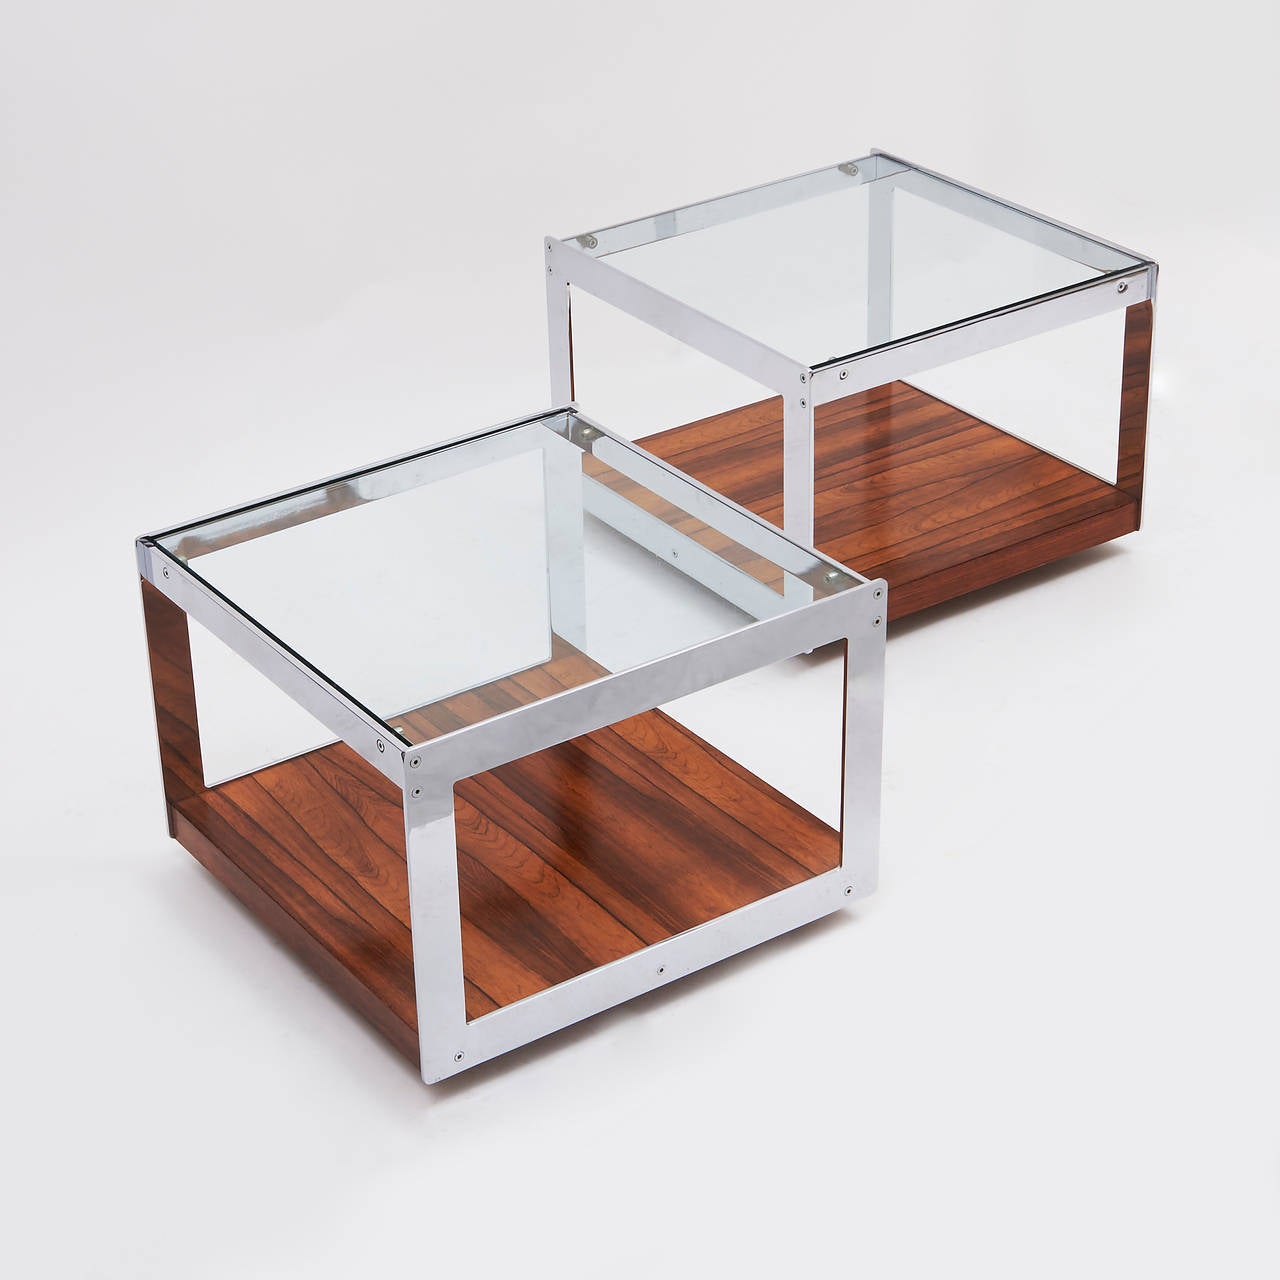 A very stylish pair of English coffee tables and a bar cart, designed by Richard Young for Merrow Associates, circa 1970. Each with a glass topped, chromed steel frame supported by a rosewood veneered base, on original castors. Sold as a set, or